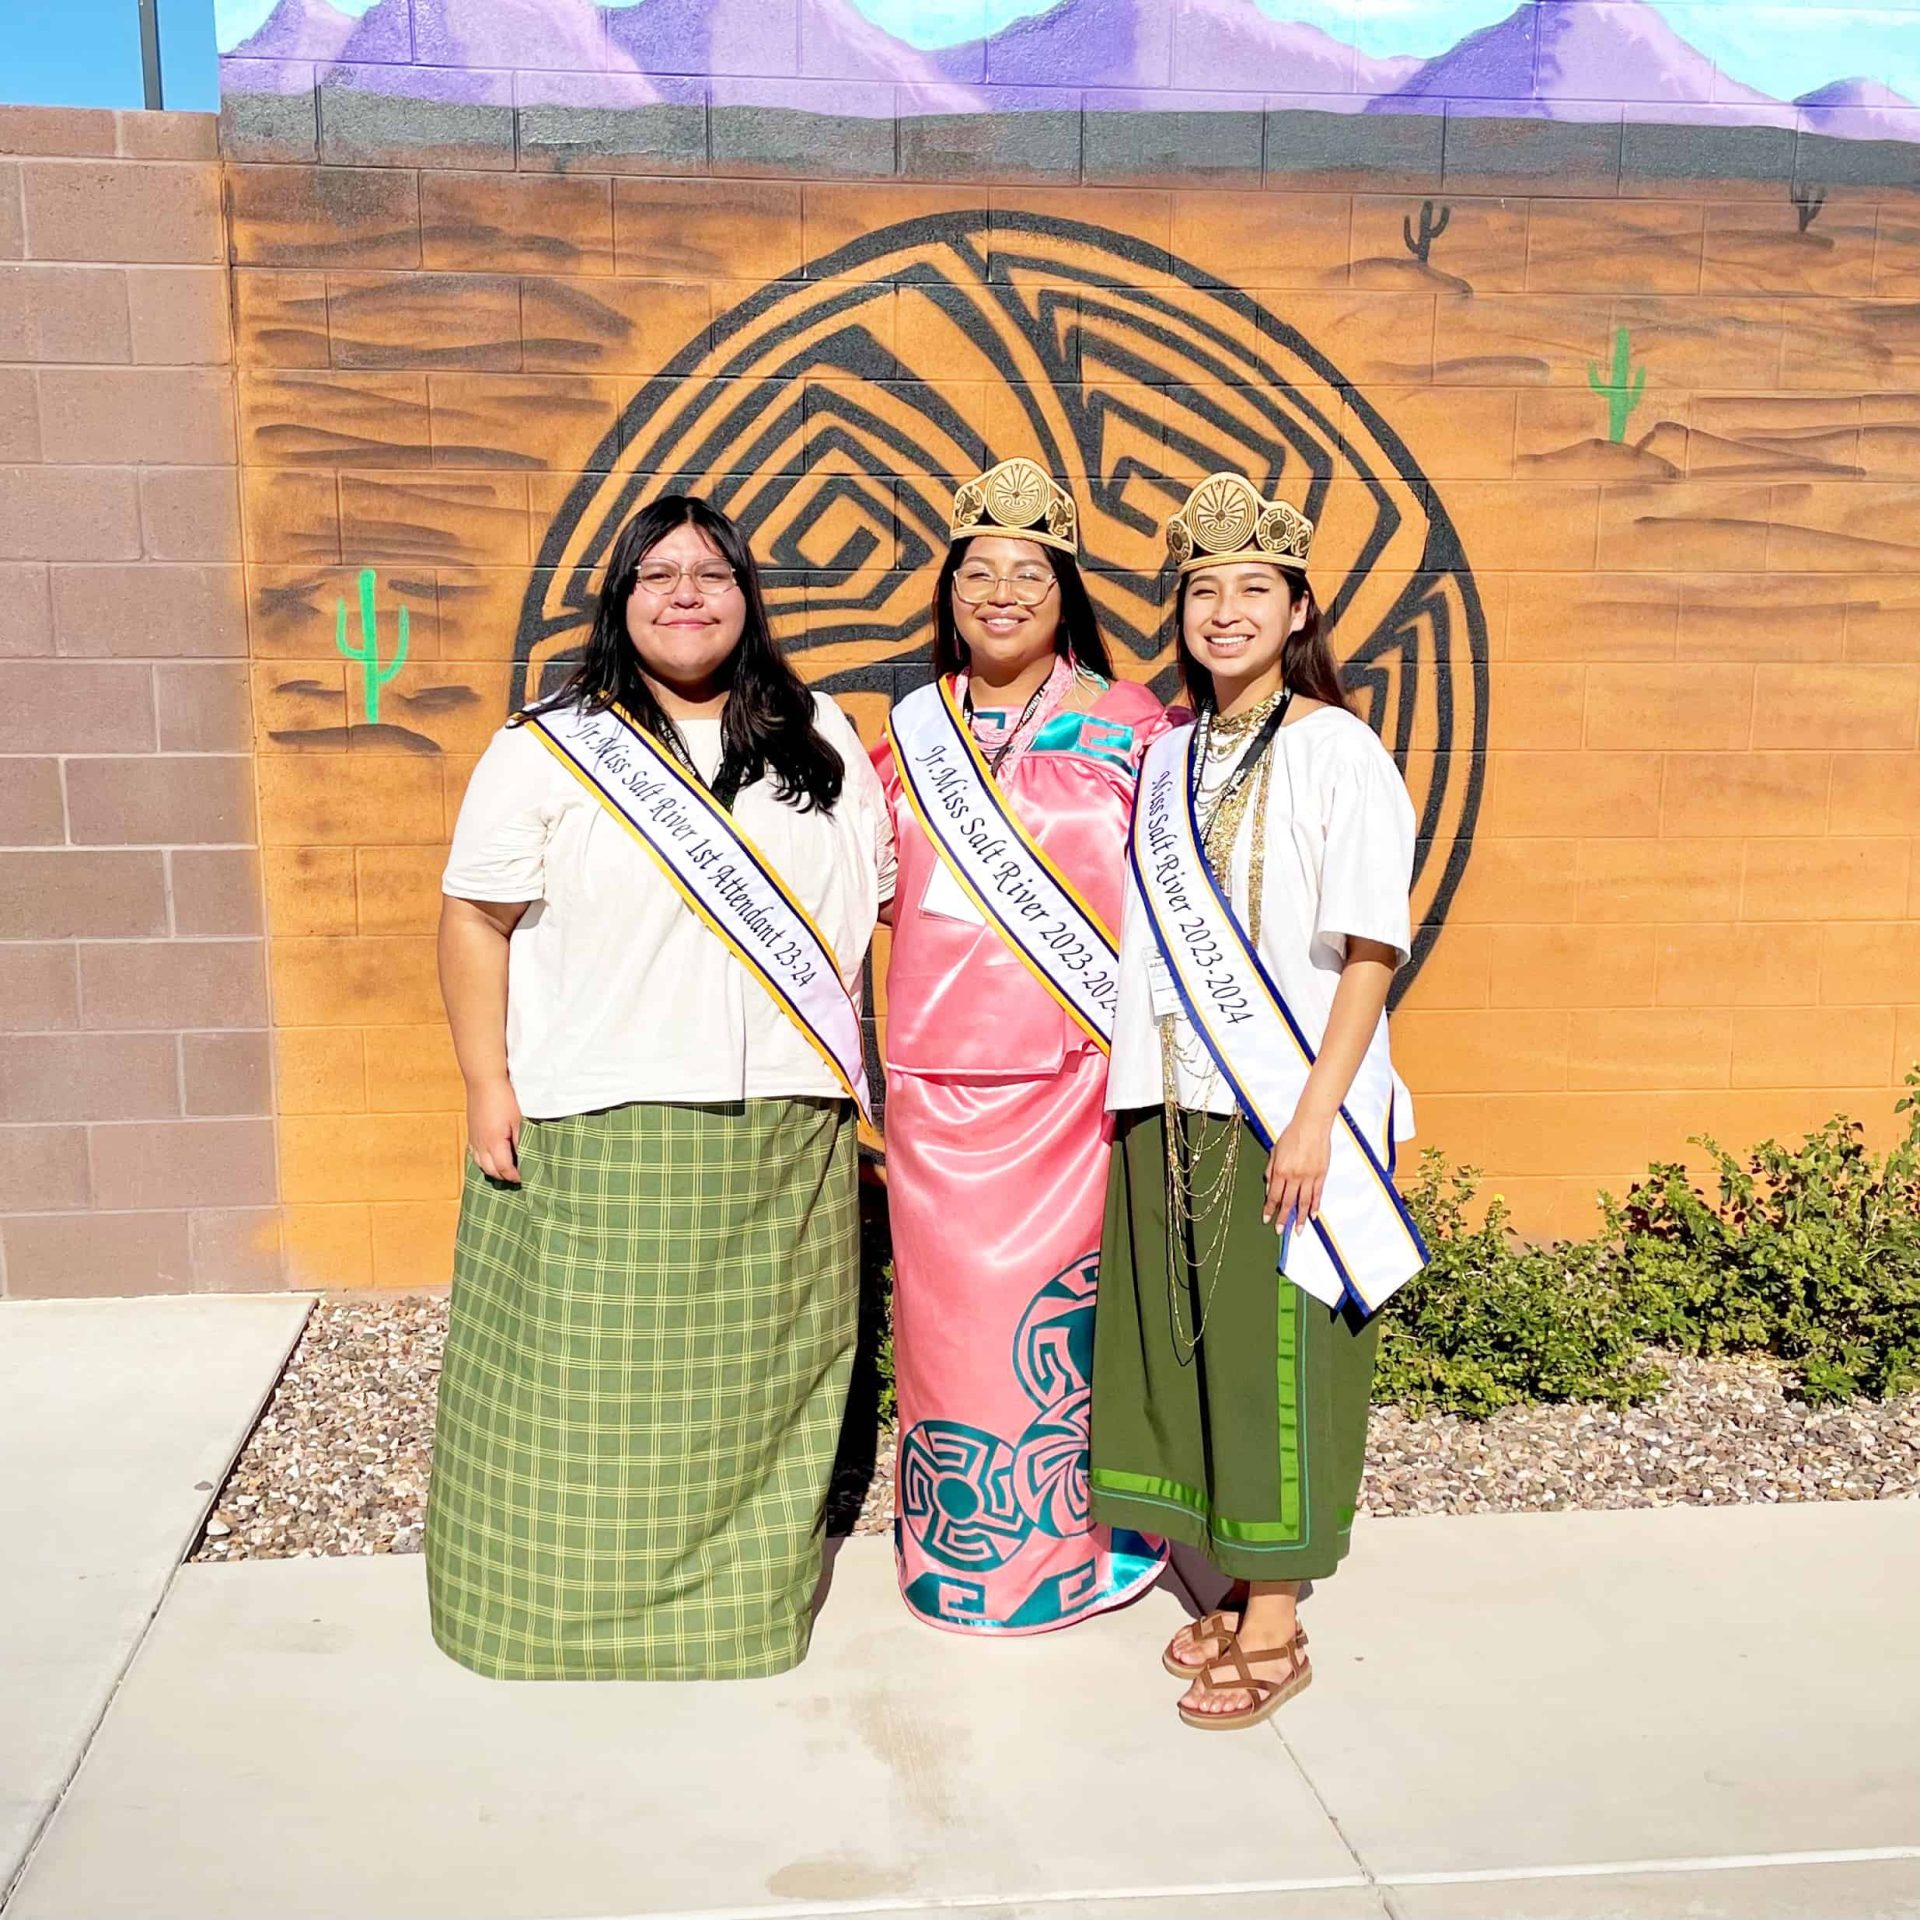 Miss and Jr. Miss Salt River Court Participate at 36th Annual Gila River Youth Conference